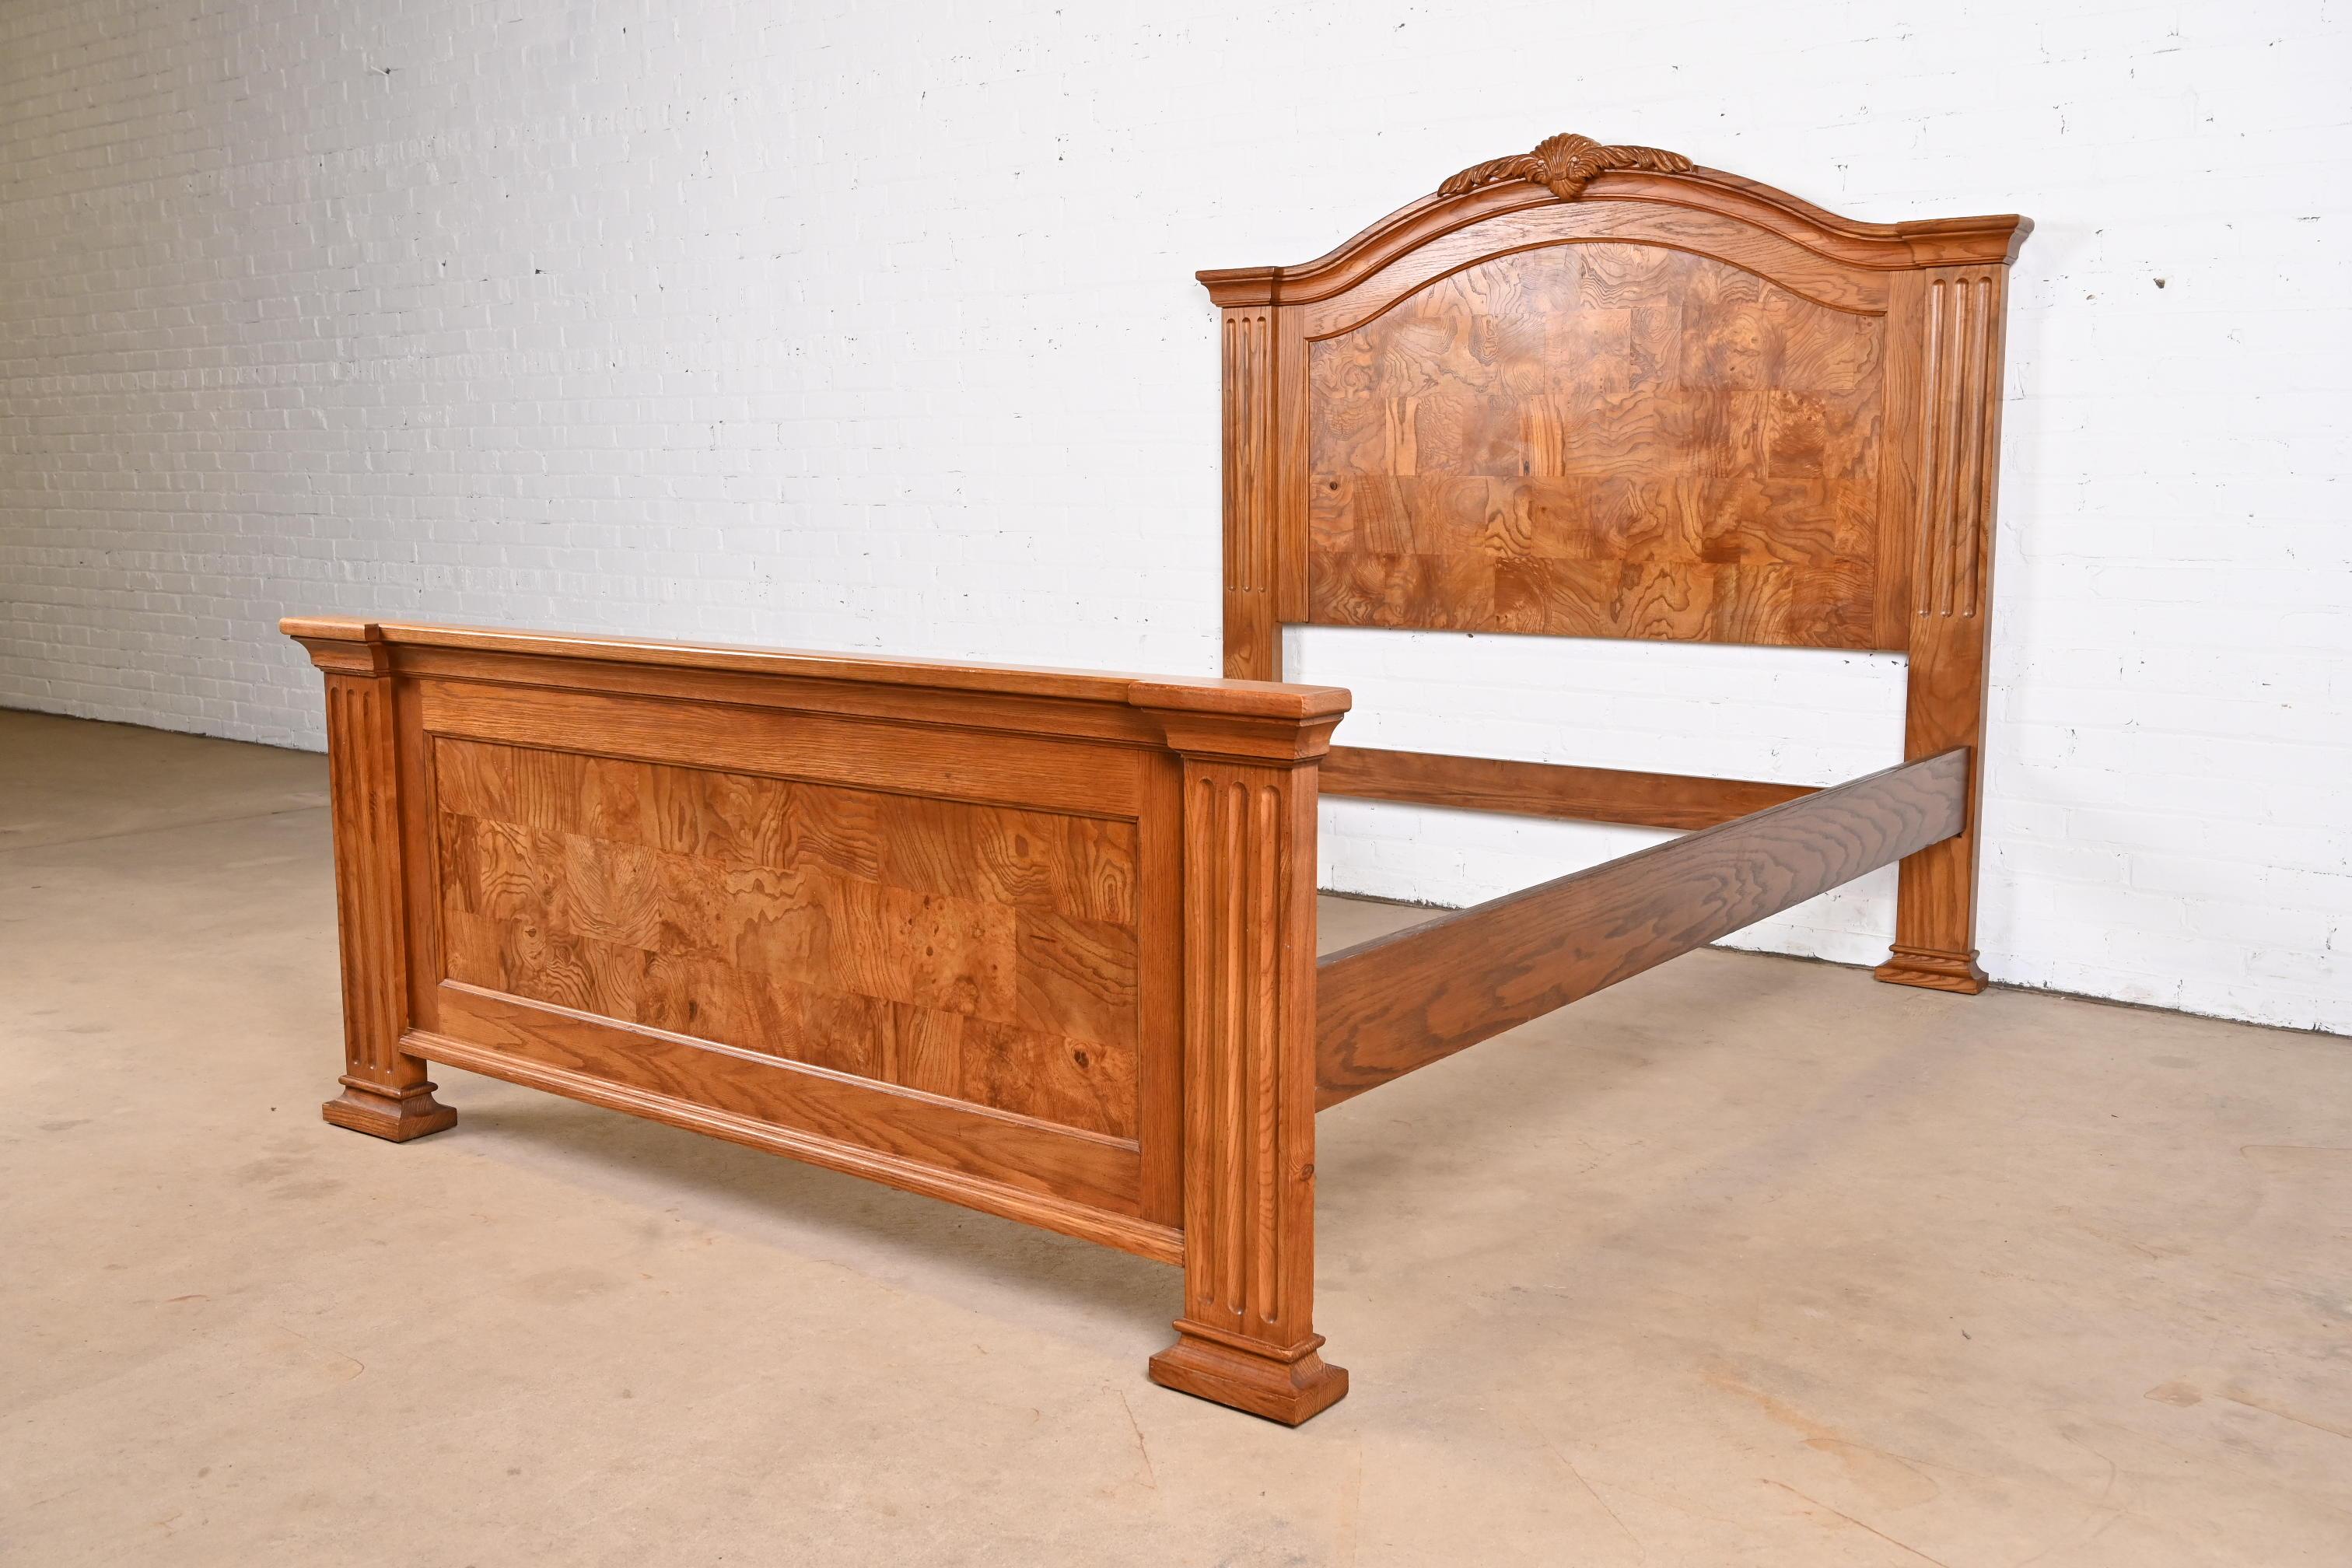 American Contemporary Neoclassical Oak and Burl Wood Queen Size Bed by Pulaski